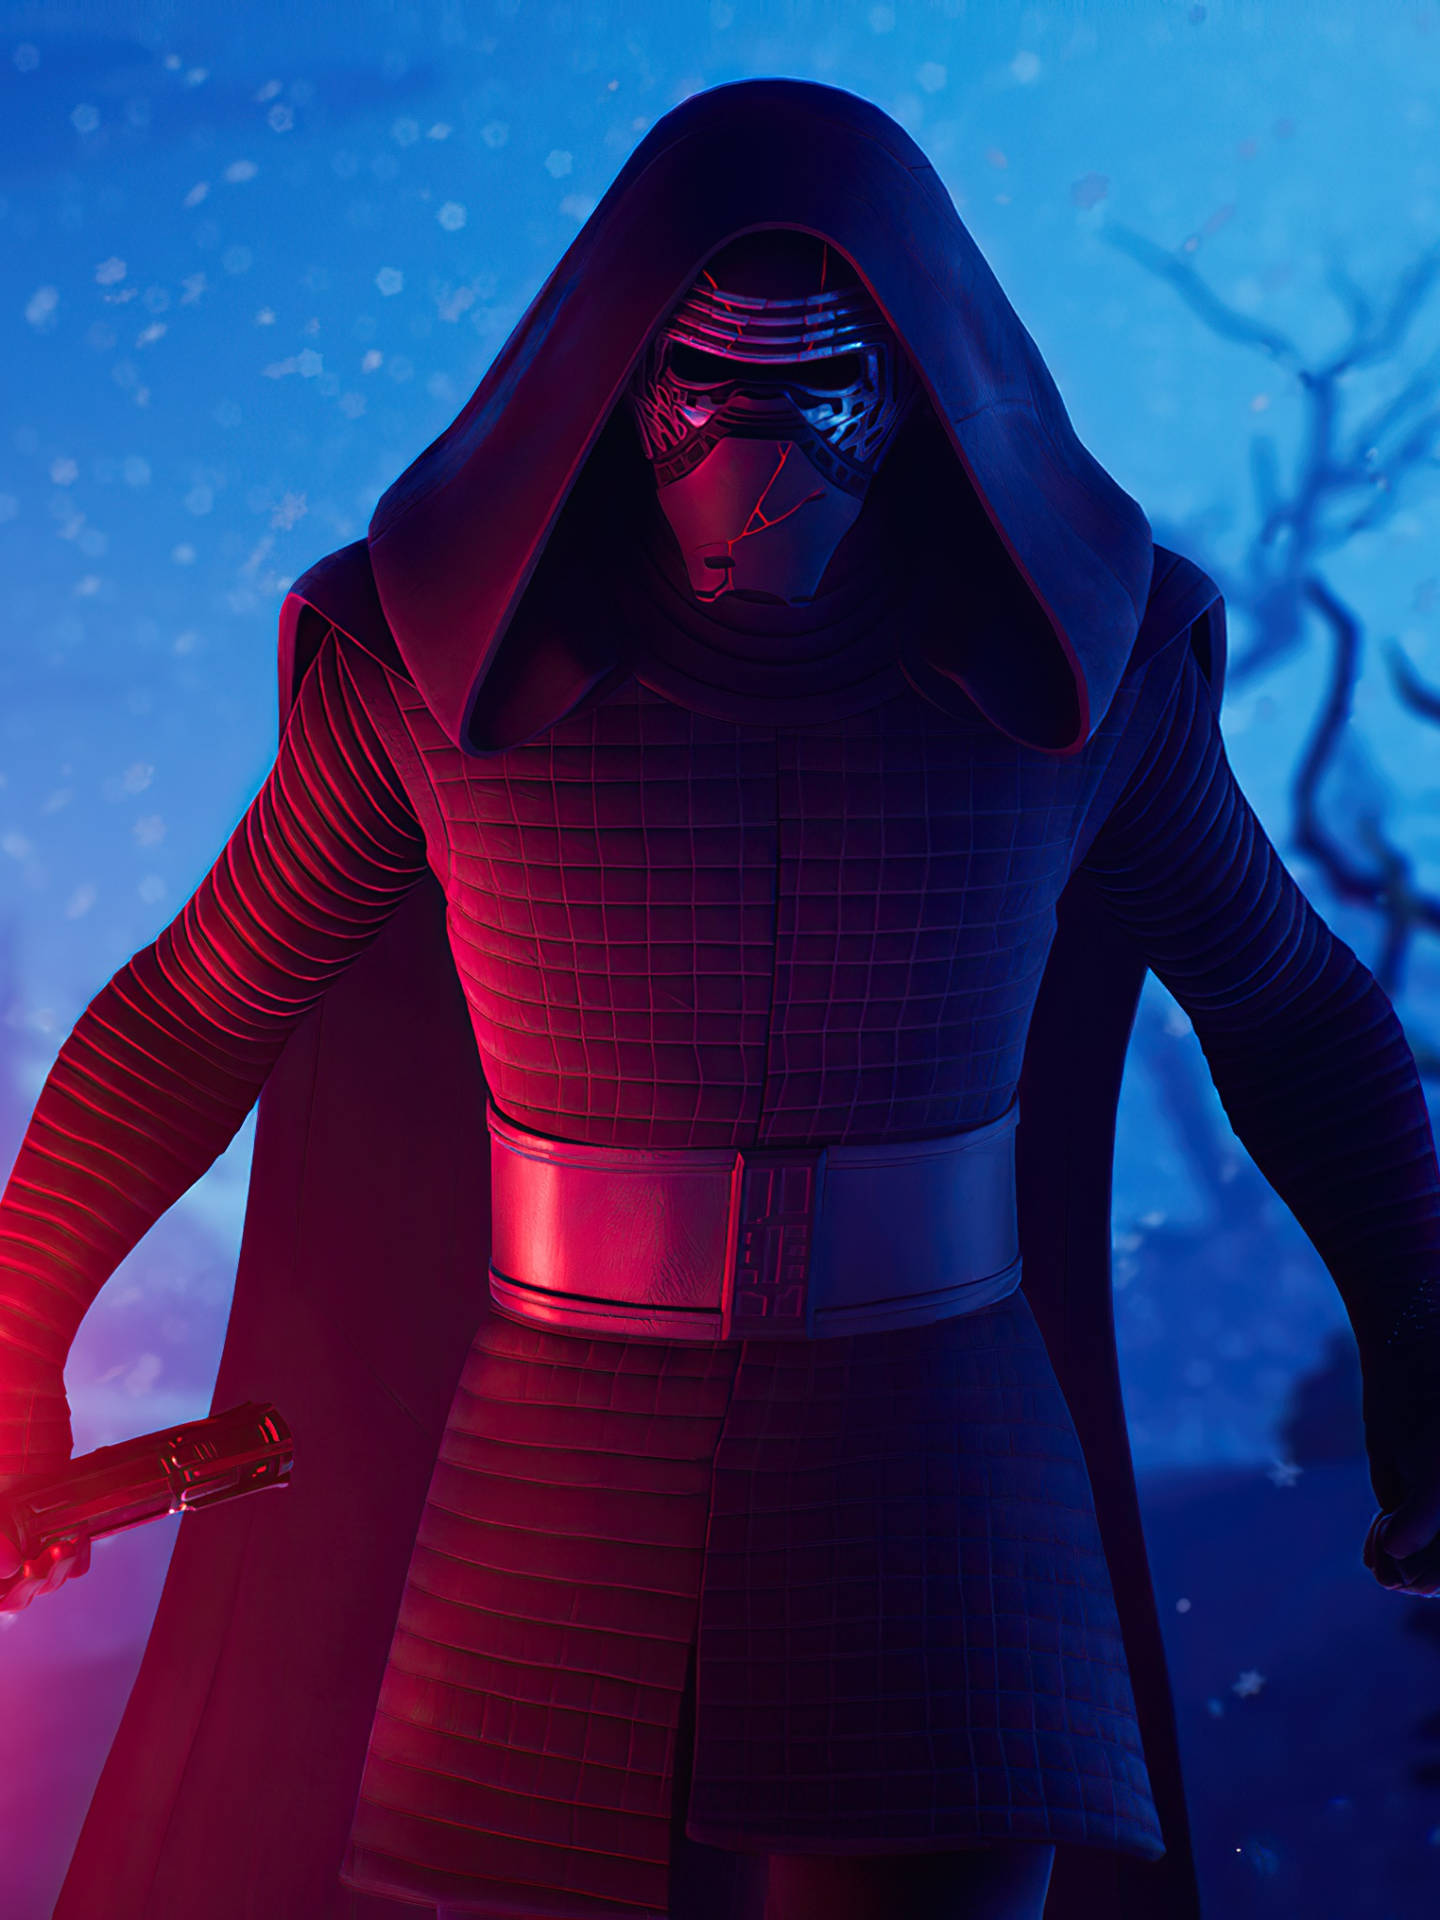 1080fortnite Kylo Ren - 1080 Fortnite Kylo Ren Is A Popular Computer Or Mobile Wallpaper That Features The Character Kylo Ren From The Game Fortnite. Wallpaper